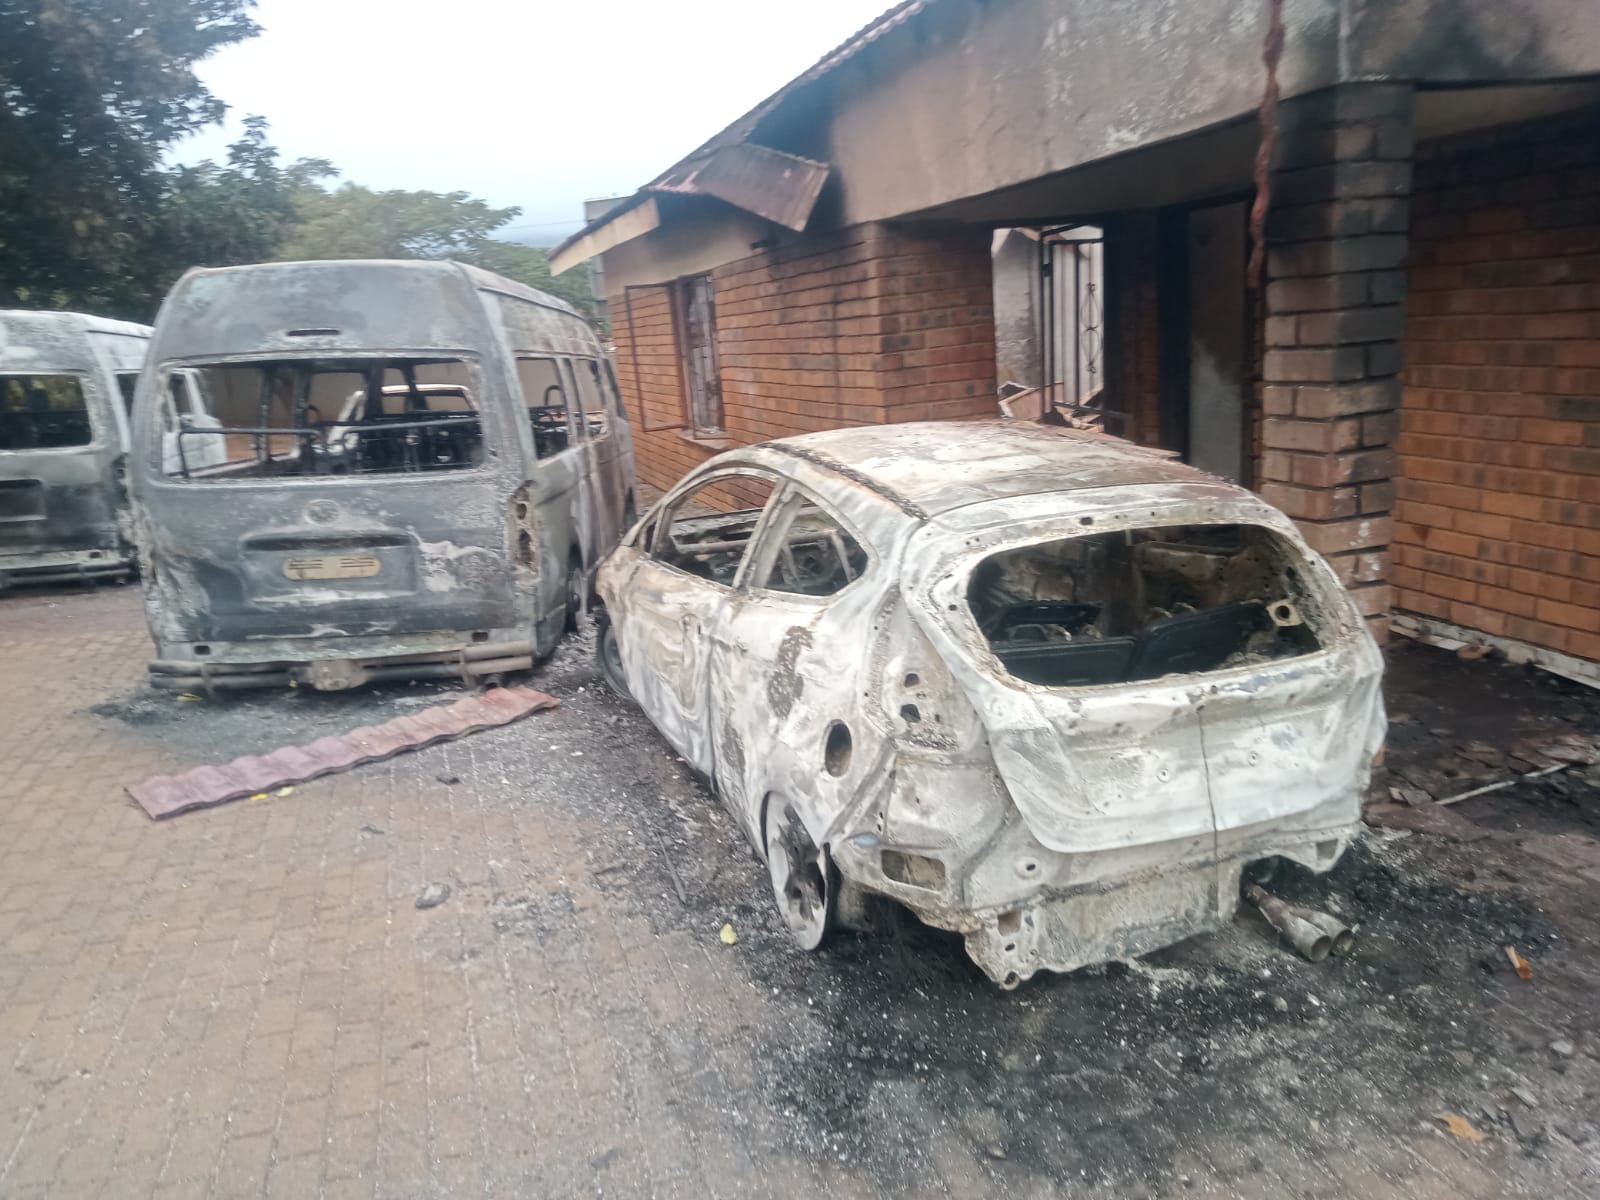 MASSIVE MANHUNT OF UNKNOWN SUSPECTS RESPONSIBLE FOR BURNING PROPERTY WORTH MORE THAN TWO MILLION RANDS IS UNDERWAY IN BOLOBEDU PRECINCT